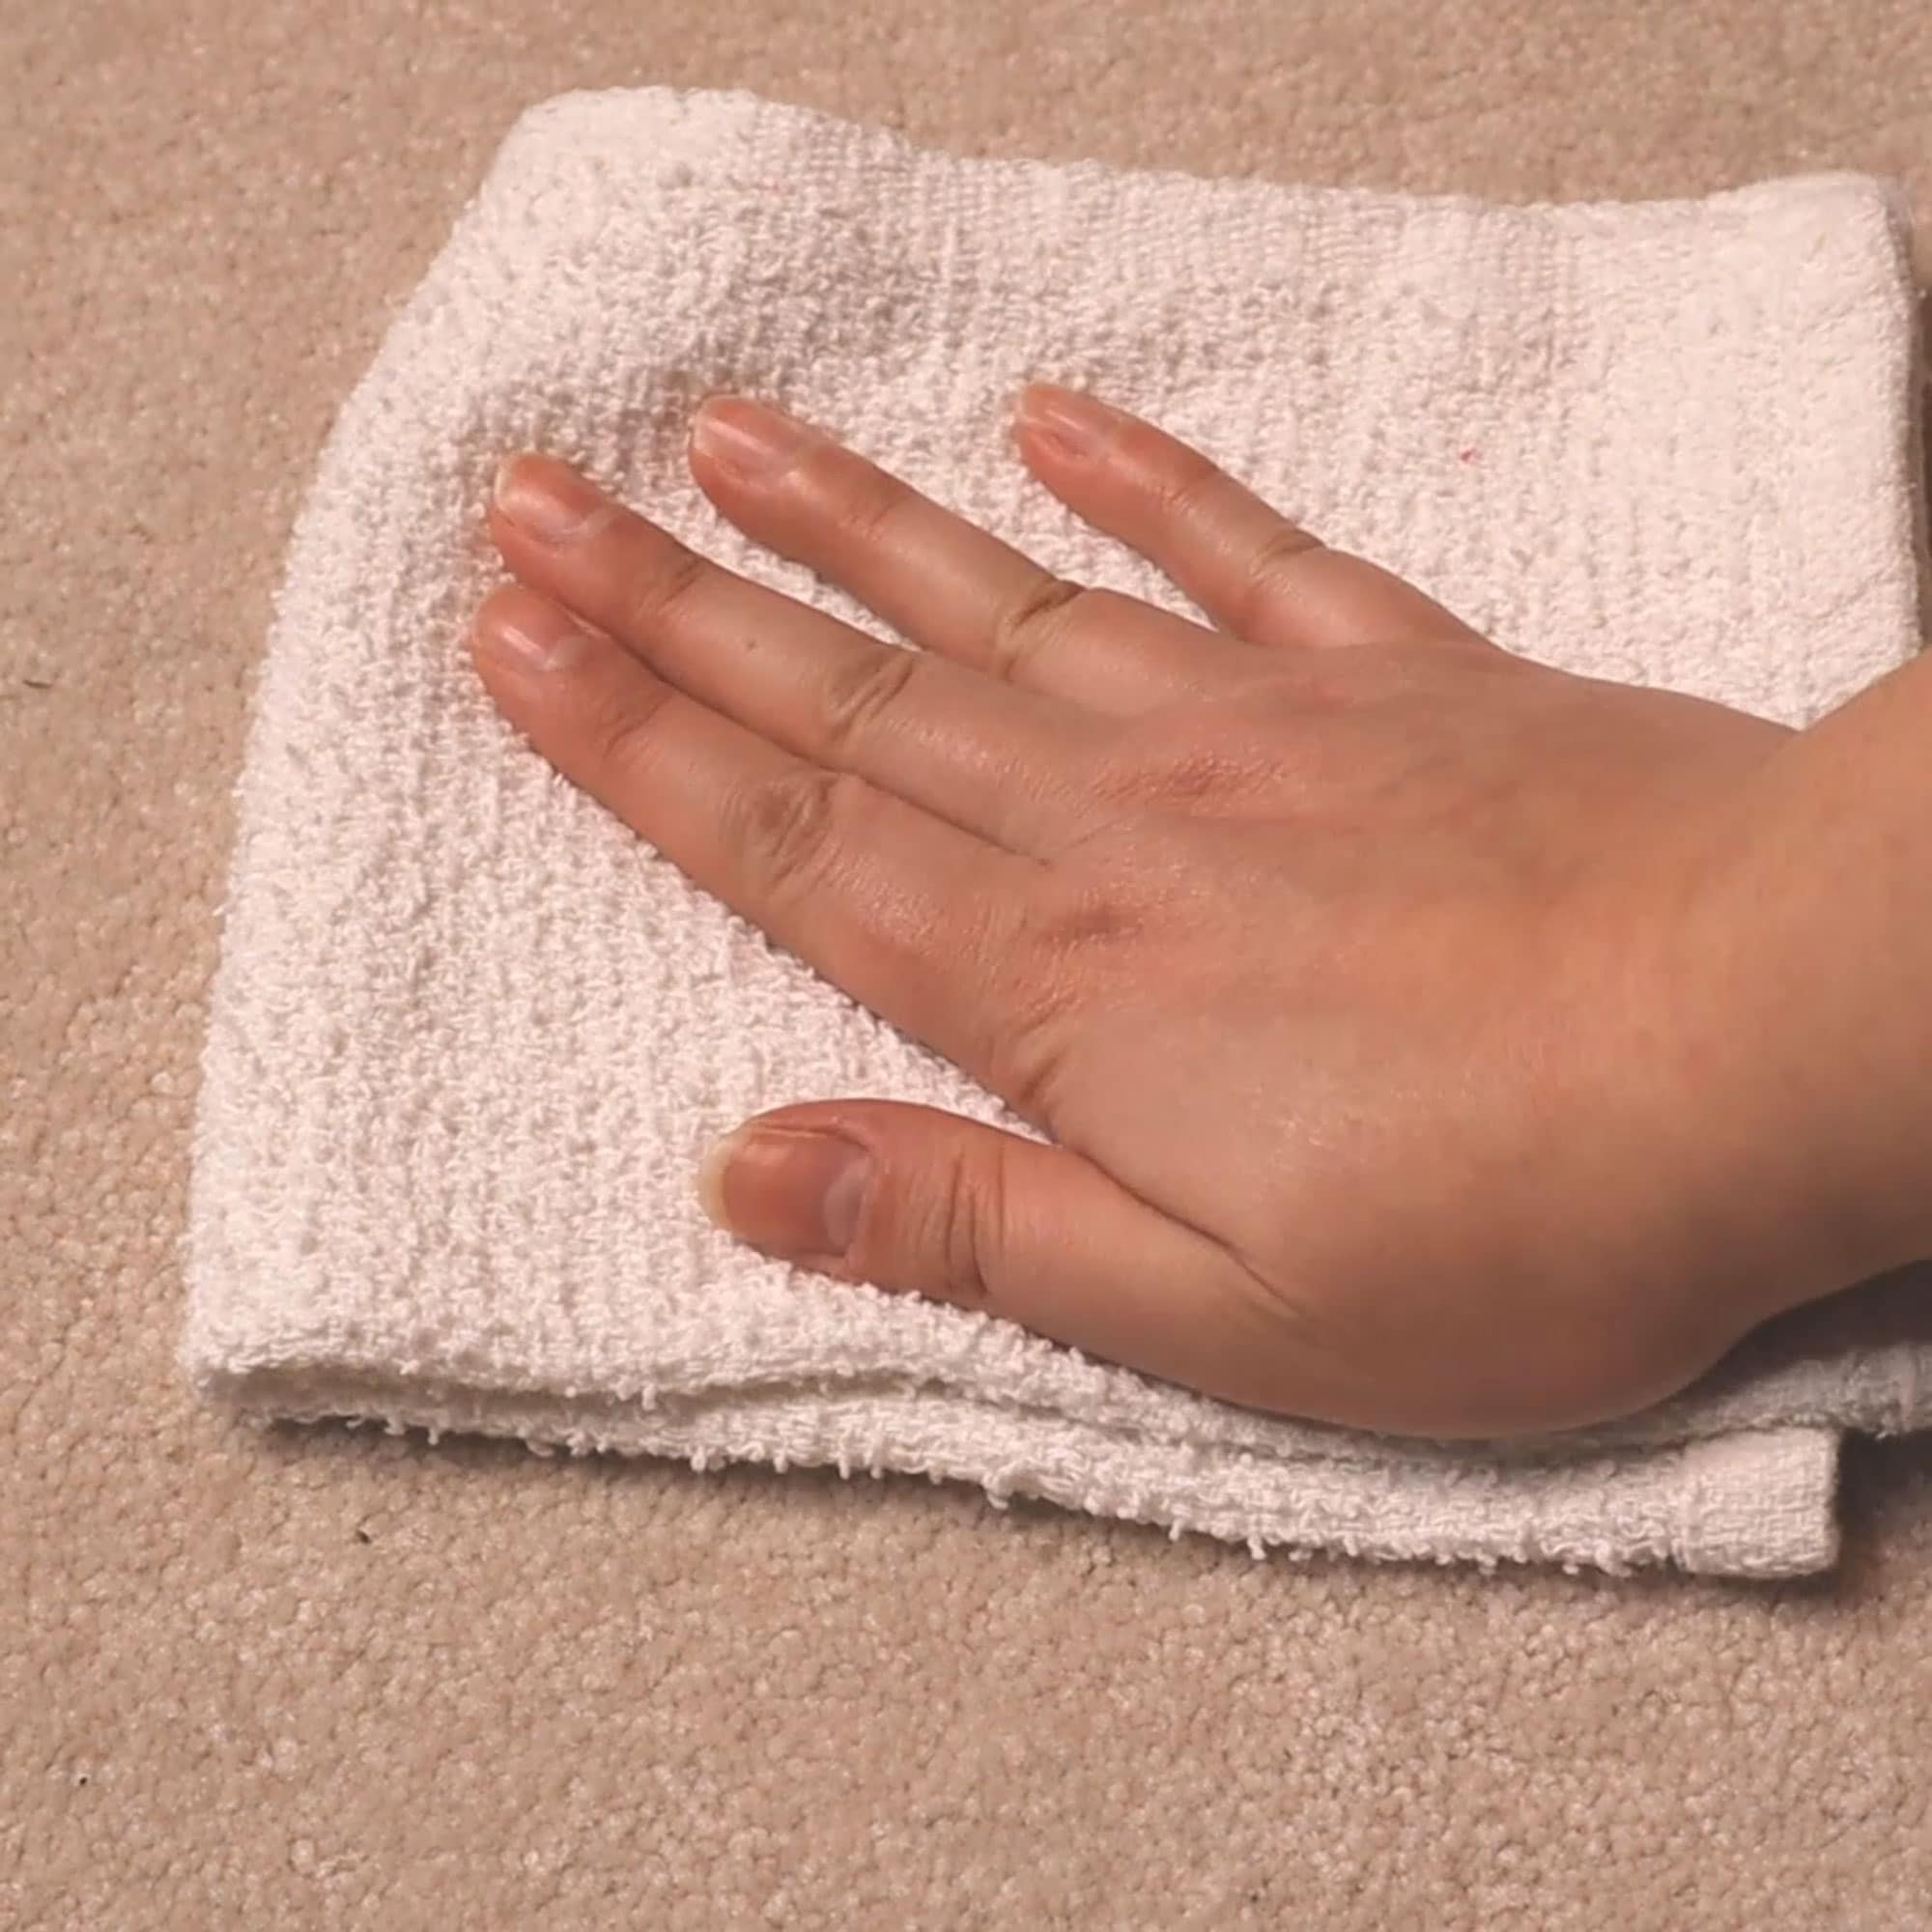 Blotting area with a white towel